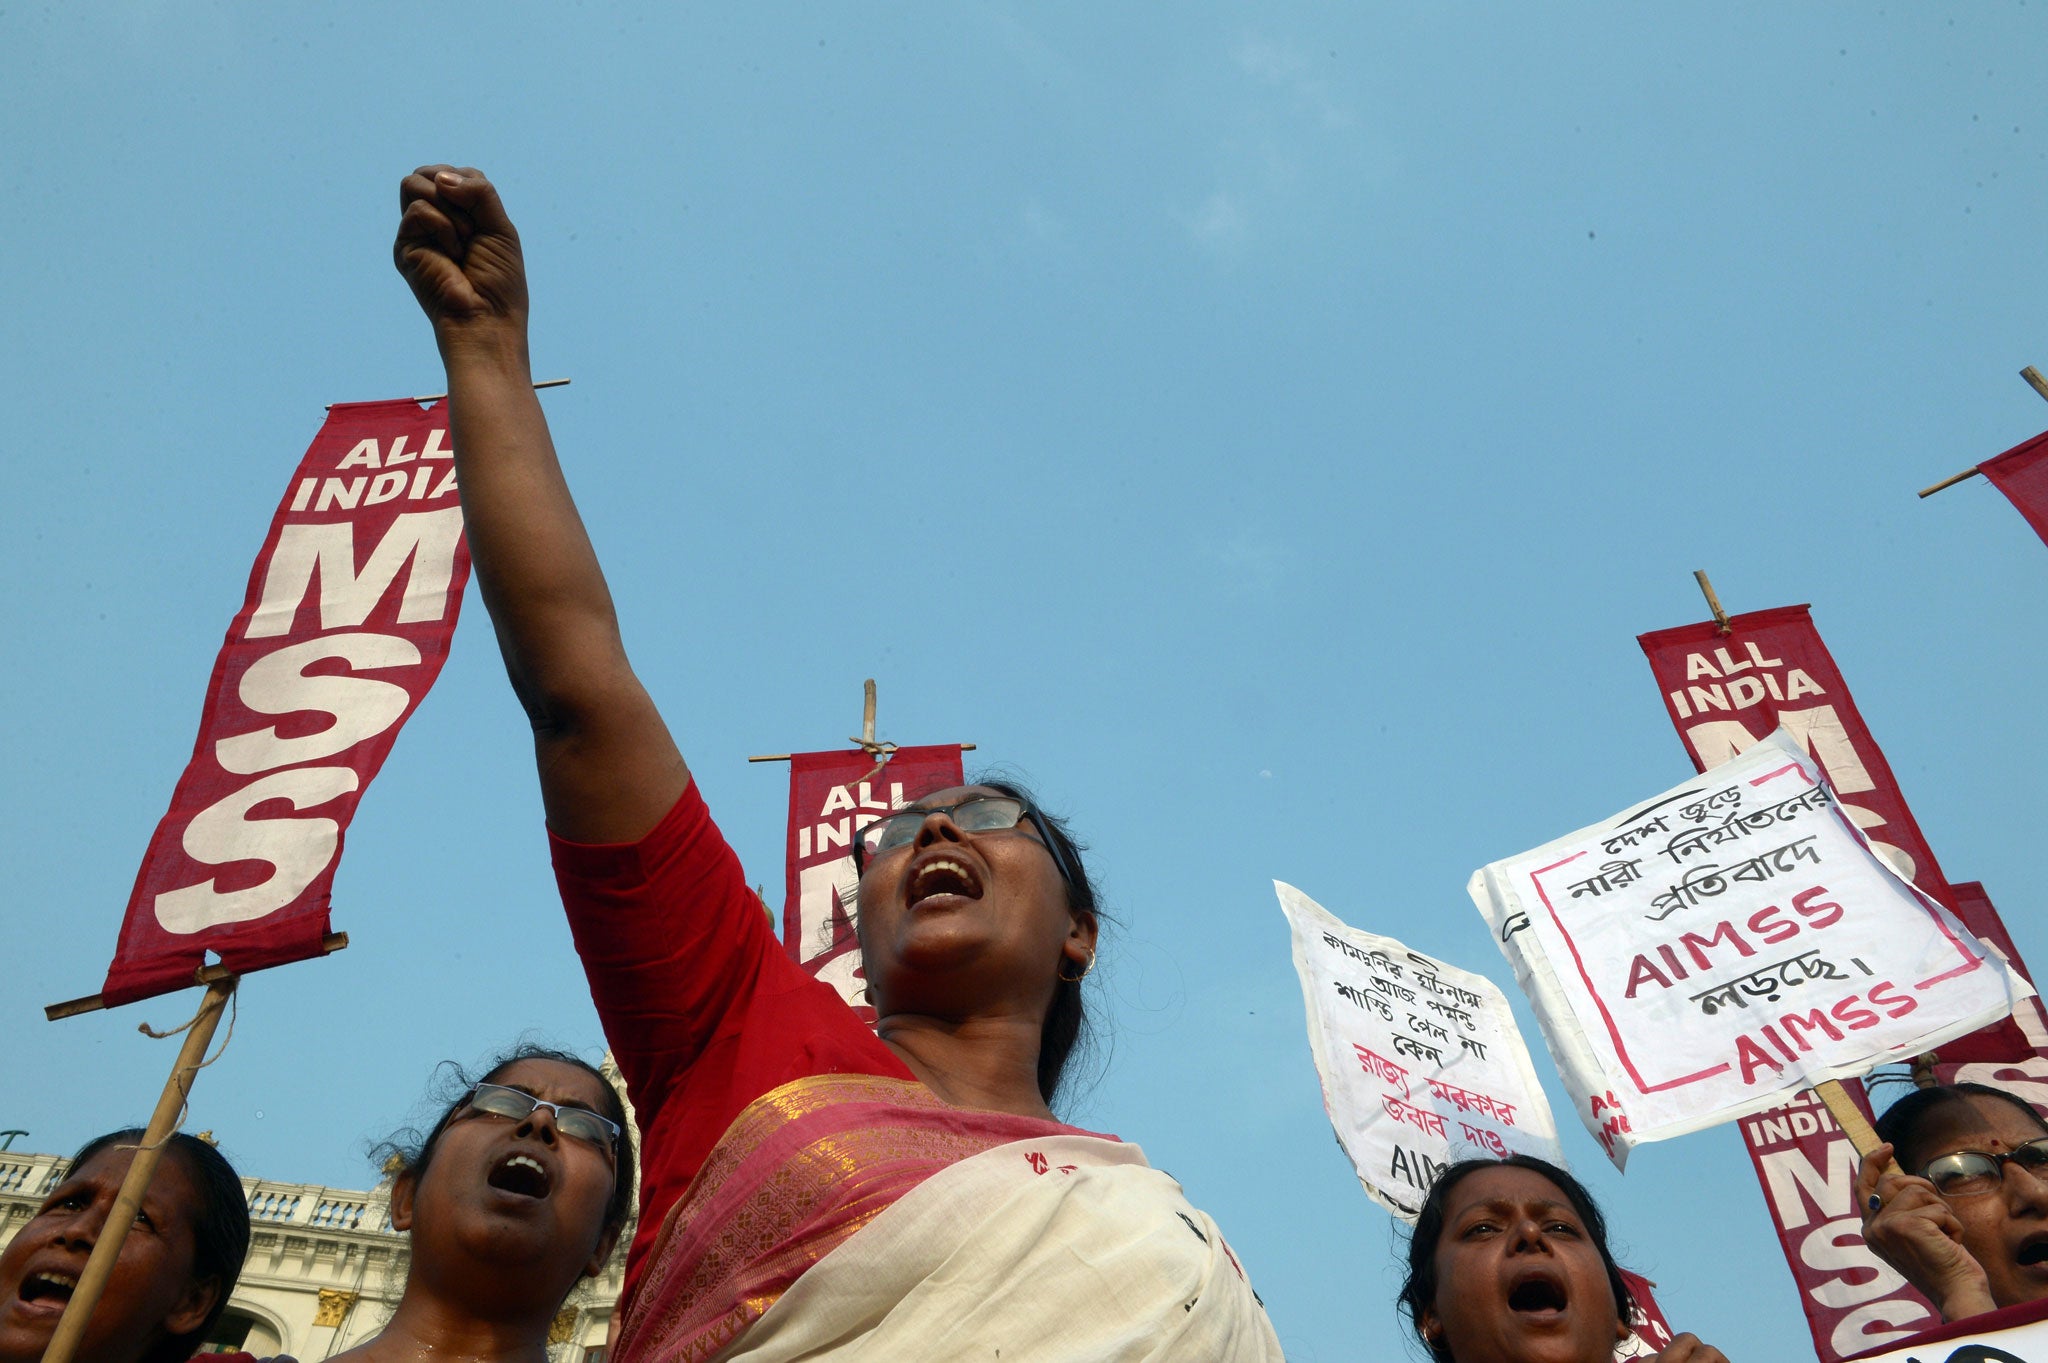 Indian activists from the Social Unity Center of India (SUCI) shout slogans against the state government in protest against the gang rape and murder of two girls in the district of Badaun in the northern state of Uttar Pradesh and recent rapes in the east